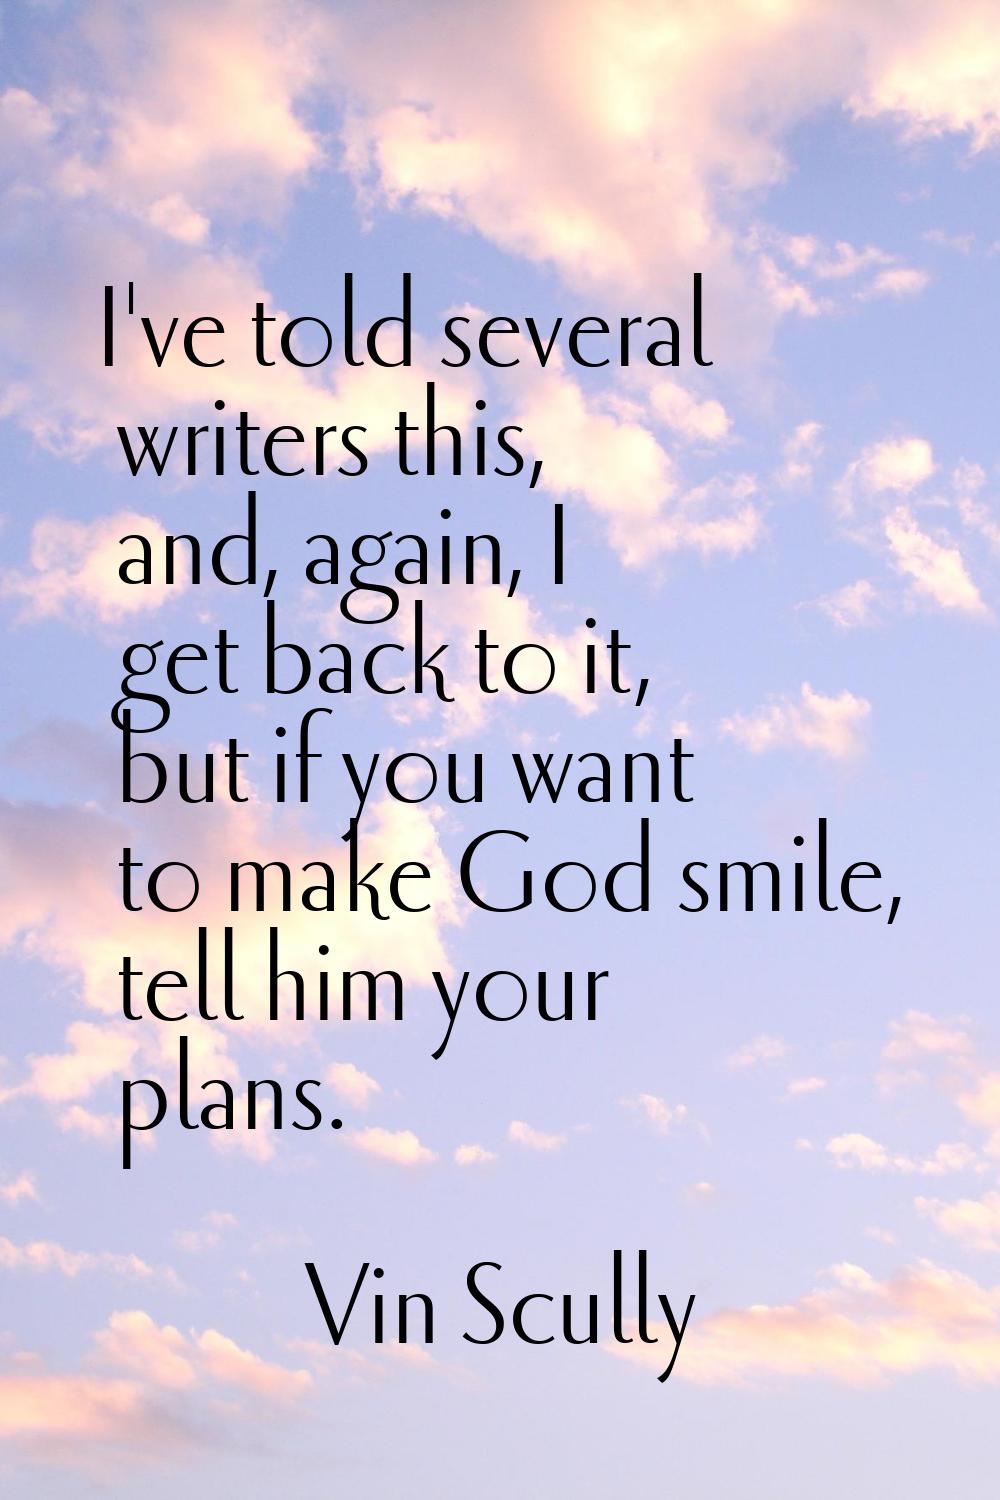 I've told several writers this, and, again, I get back to it, but if you want to make God smile, te